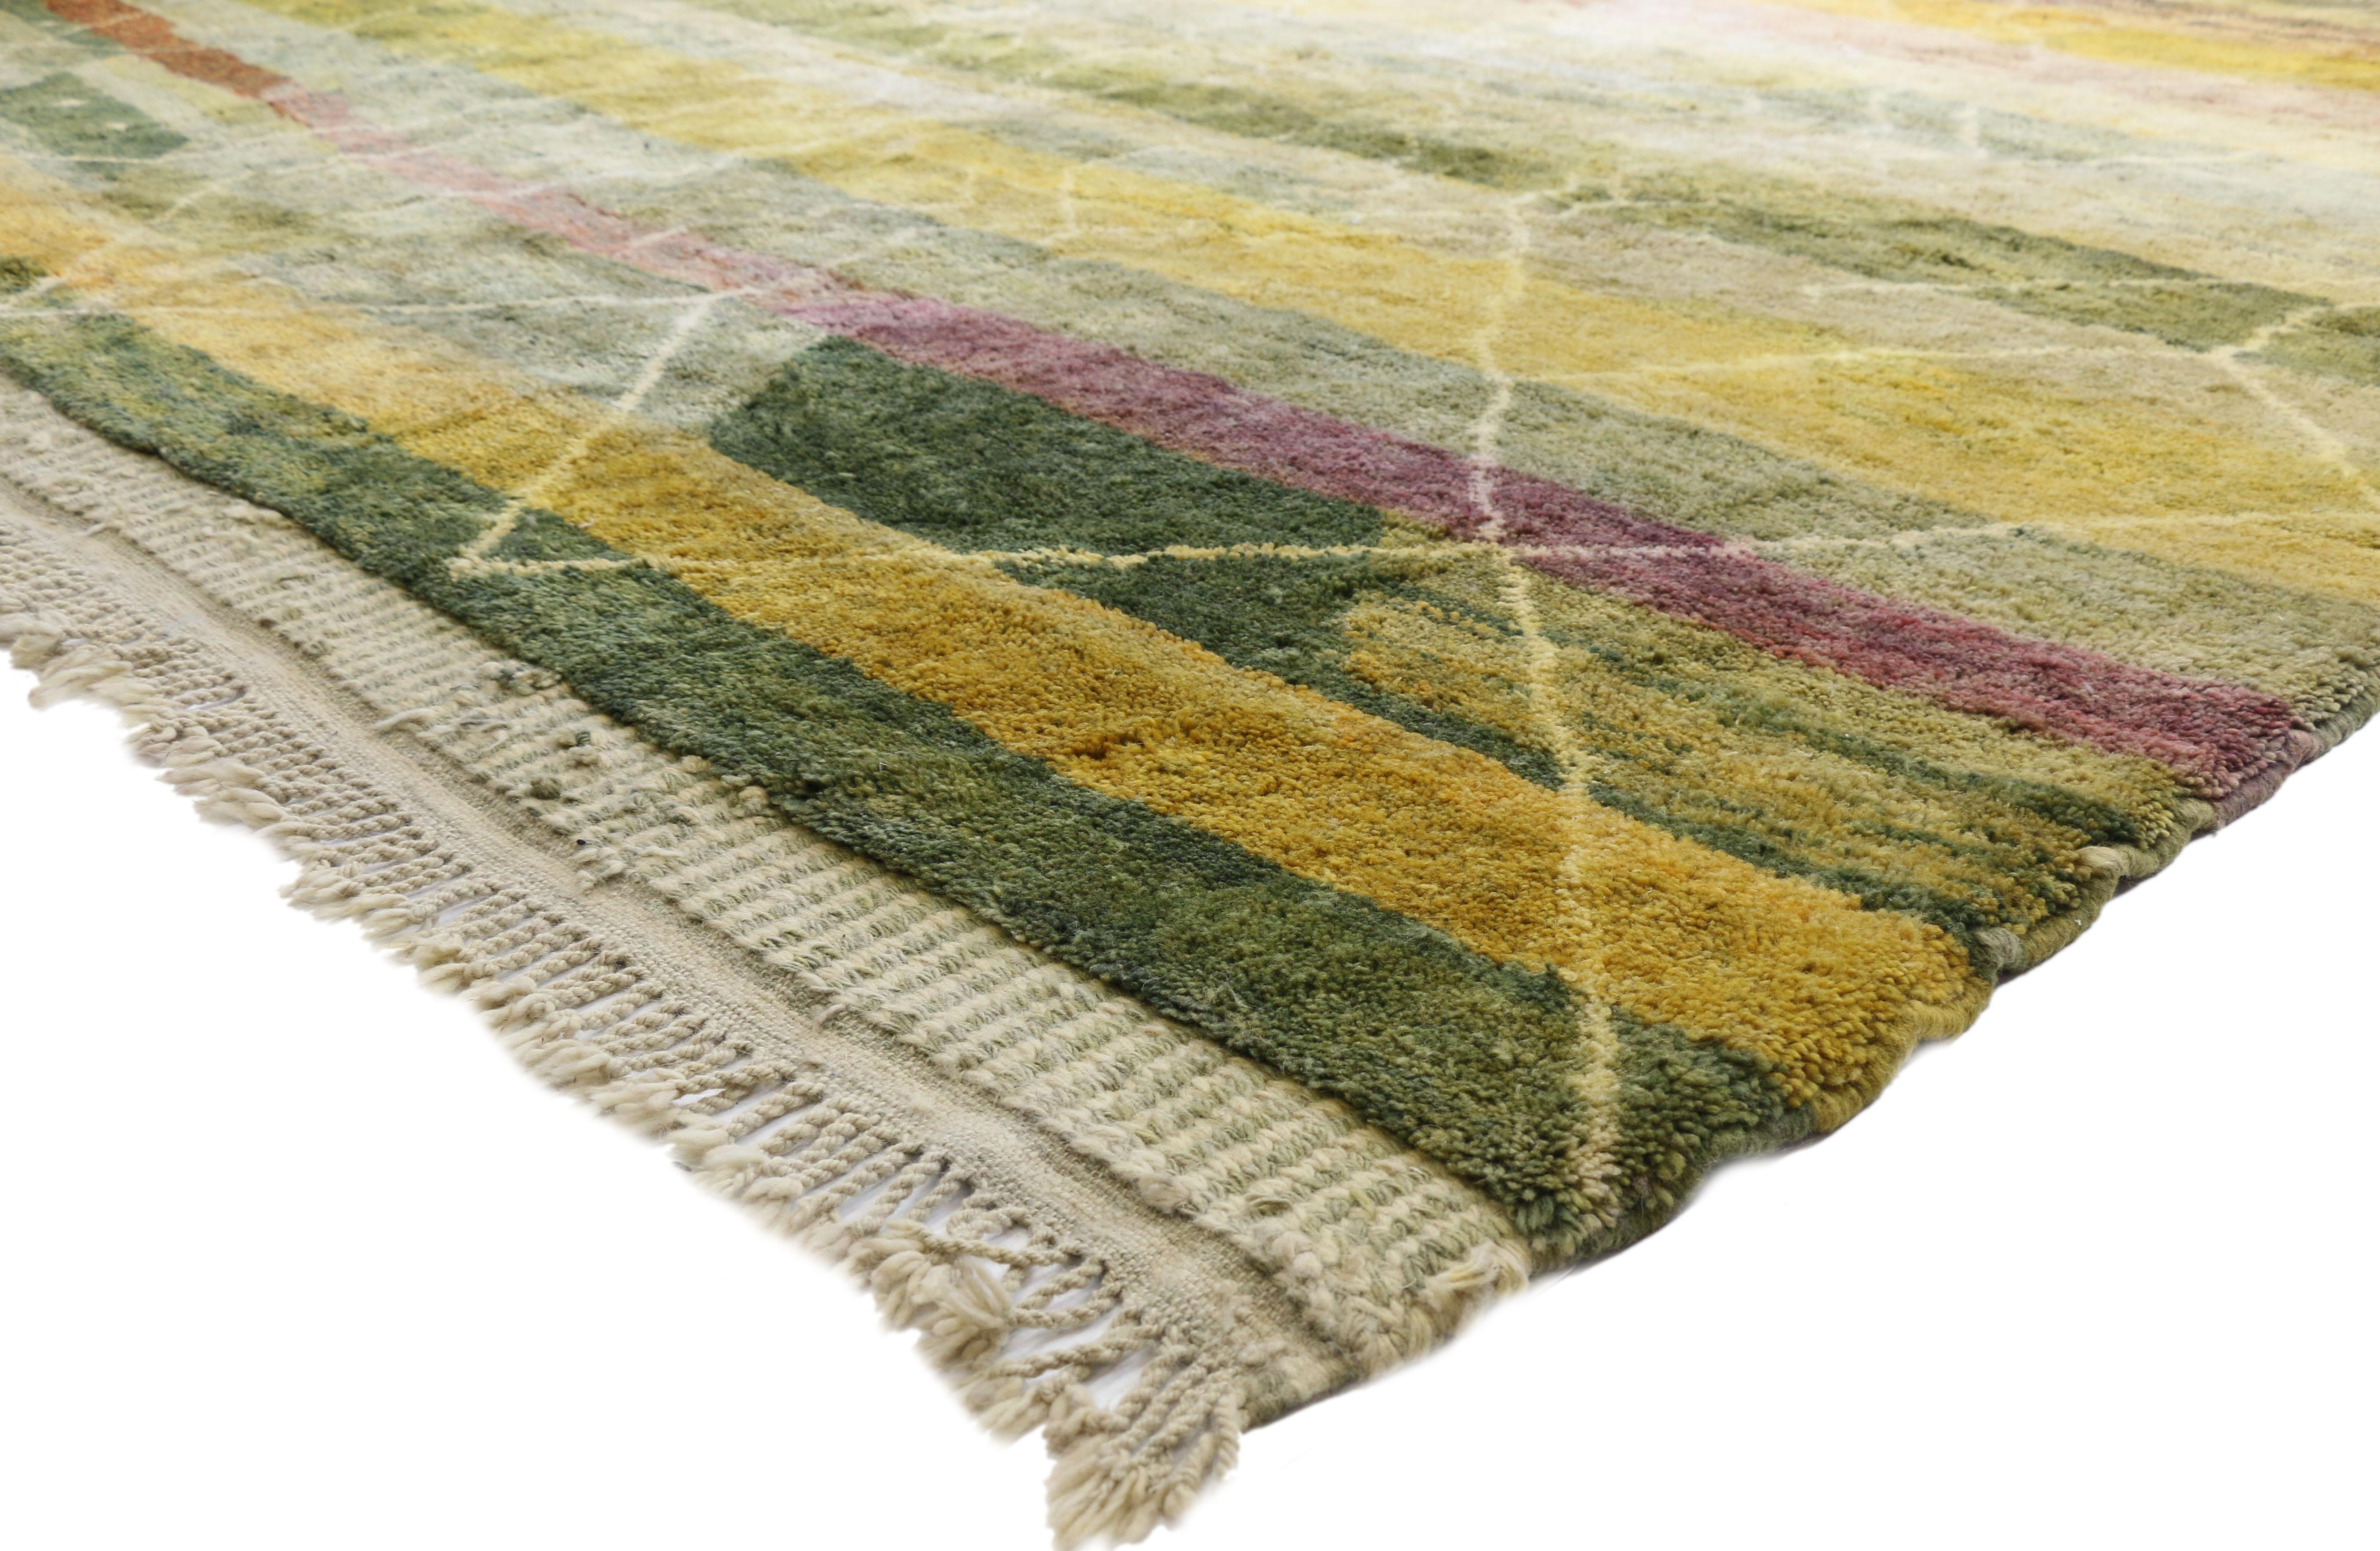 20801, Earthy Berber Moroccan Rug with Modern Biophilic Design, 11'00 x 12'09. This hand knotted wool Berber Moroccan rug features horizontal bands of earthy-greenish hues in a watercolor effect like a lush, layered natural landscape. Showcasing a